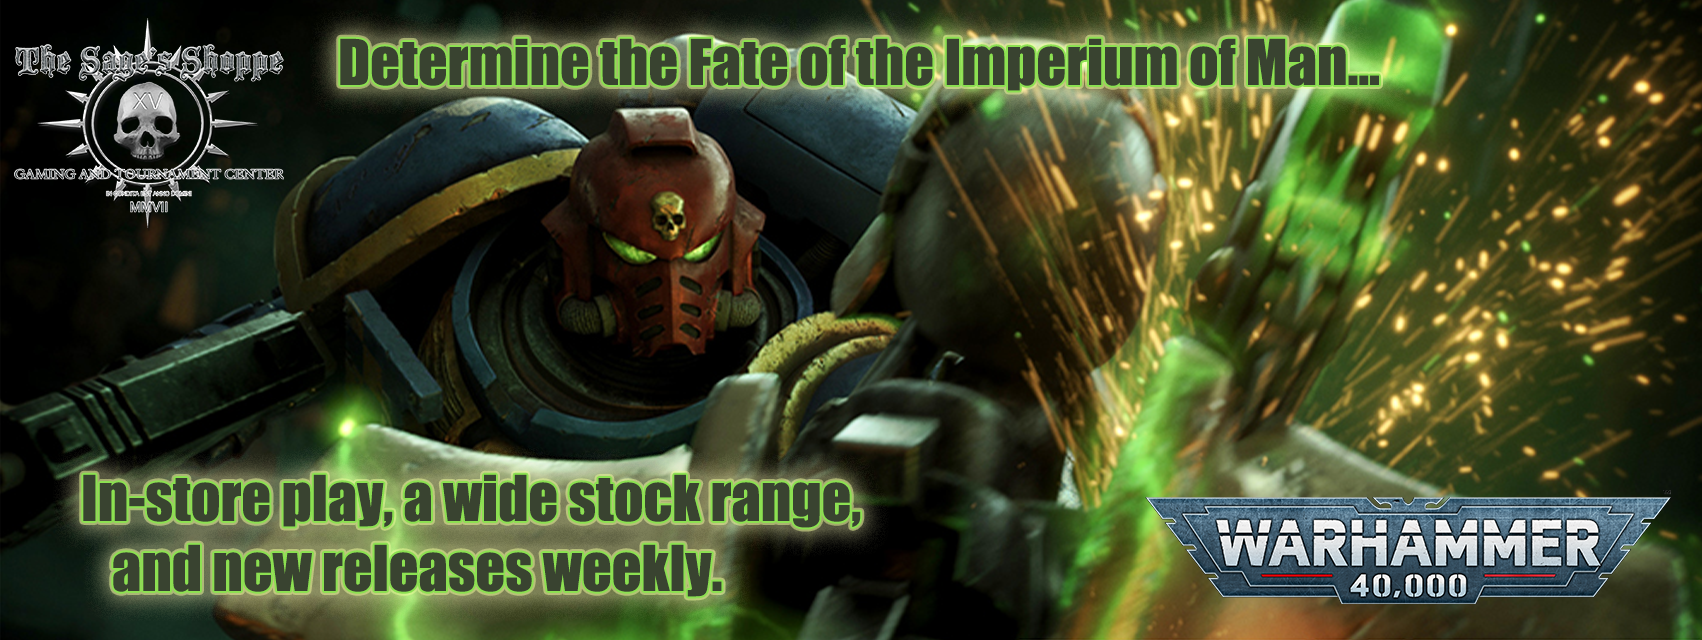 Warhammer 40000 Decide the Fate of the Galaxy in the Sage's War Room New Releases Every Weekend